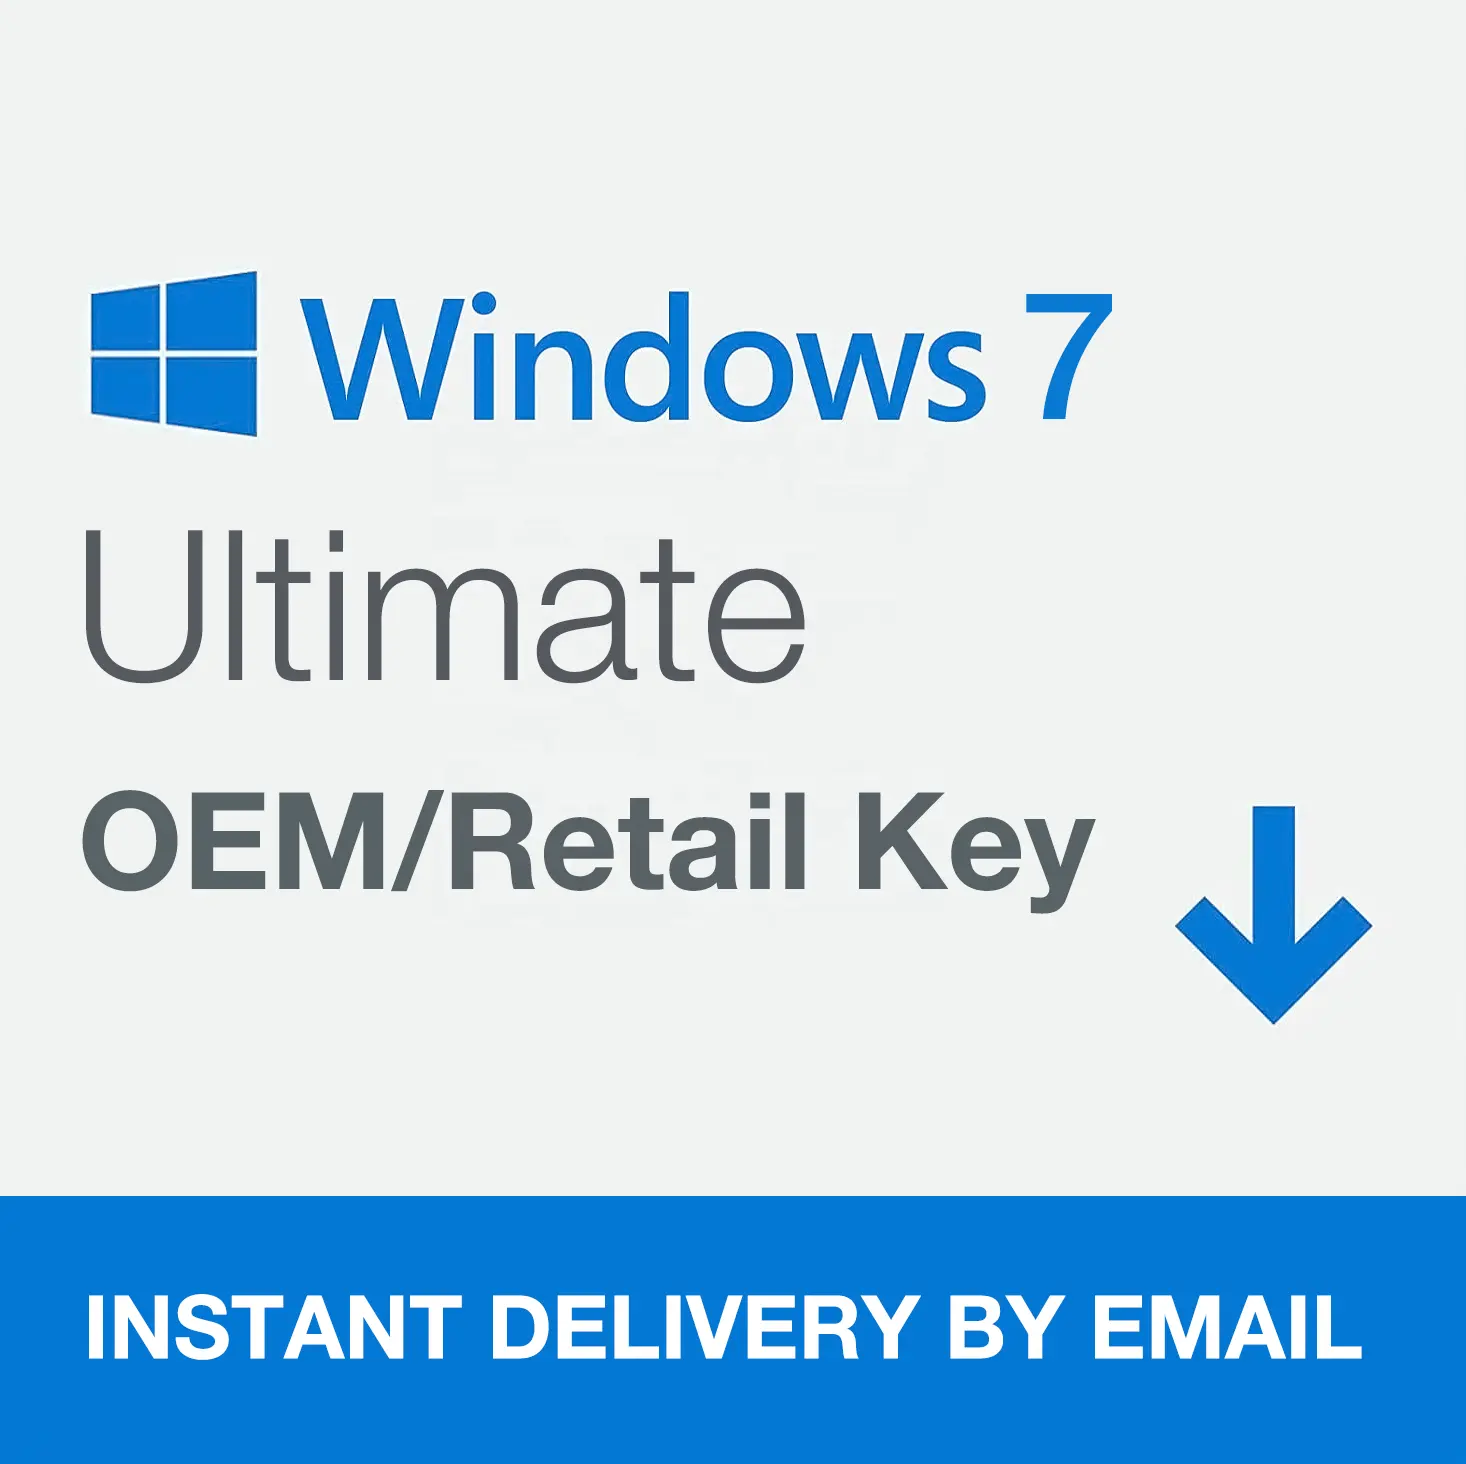 Online 24 hours Ready Stock Email Delivery Win 7 ultimate Key Windows 7 ultimate Digital Key 64bit/32 Bit Just Key Code